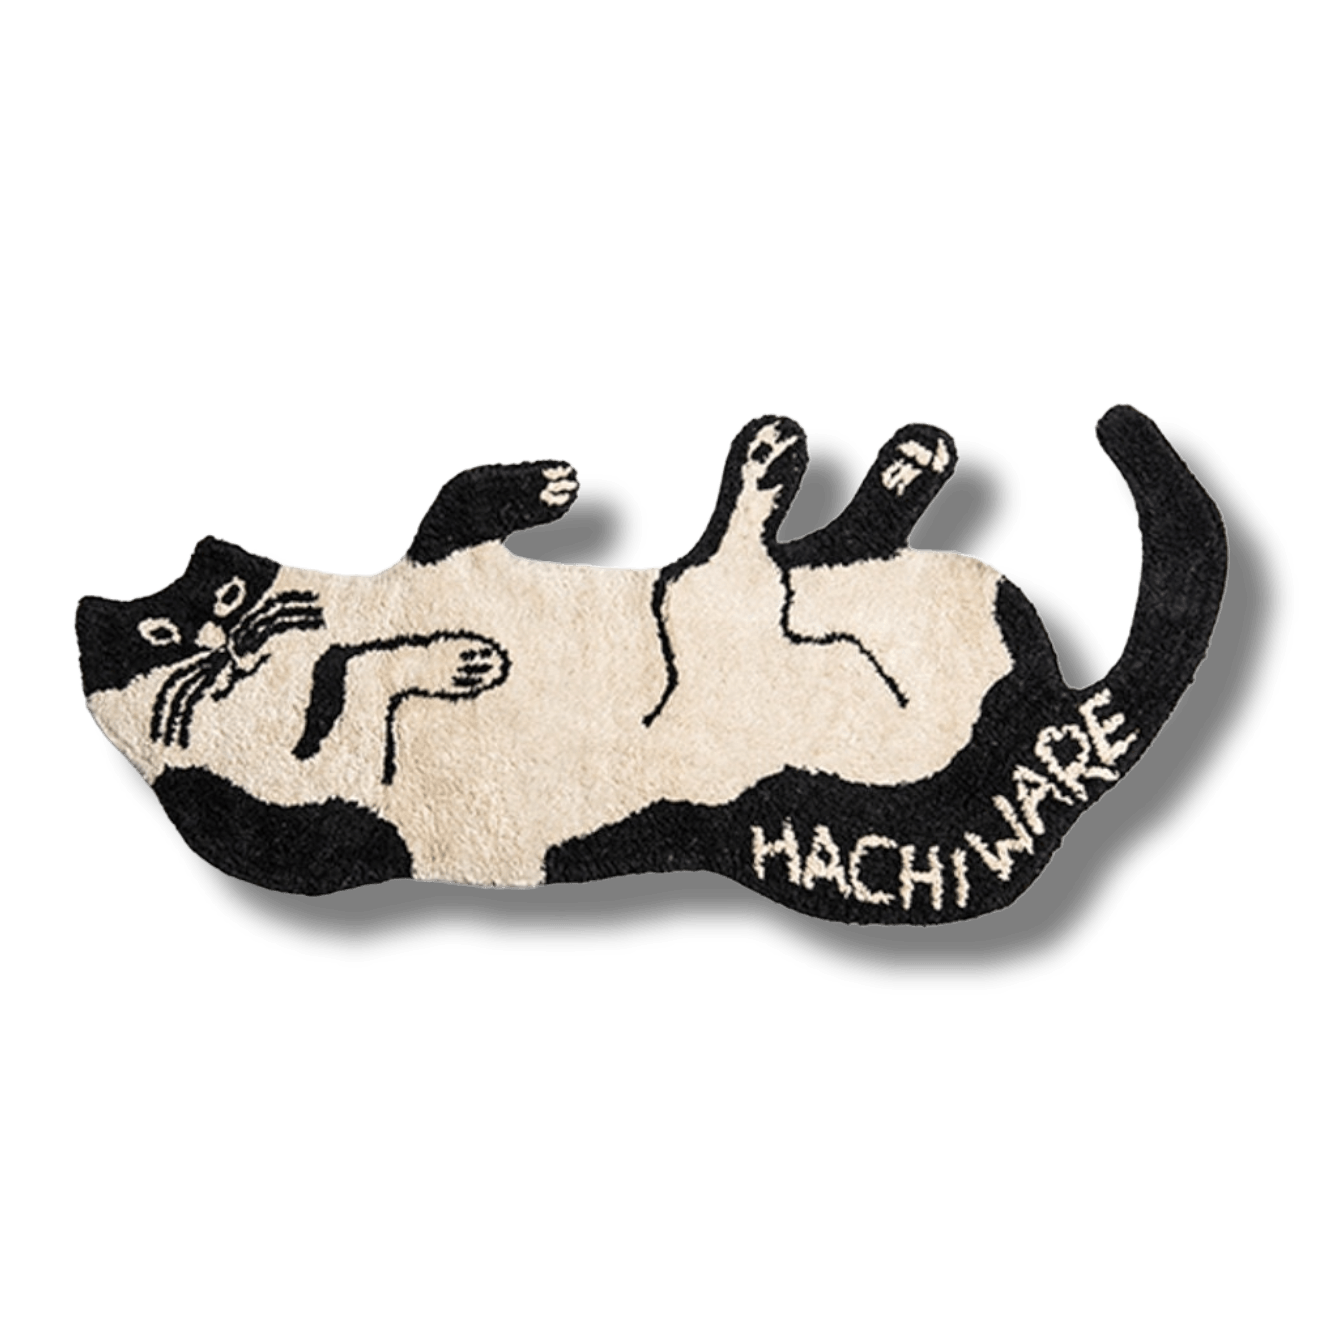 Black and White Cat Shaped Cotton Bath Mat - MAIA HOMES